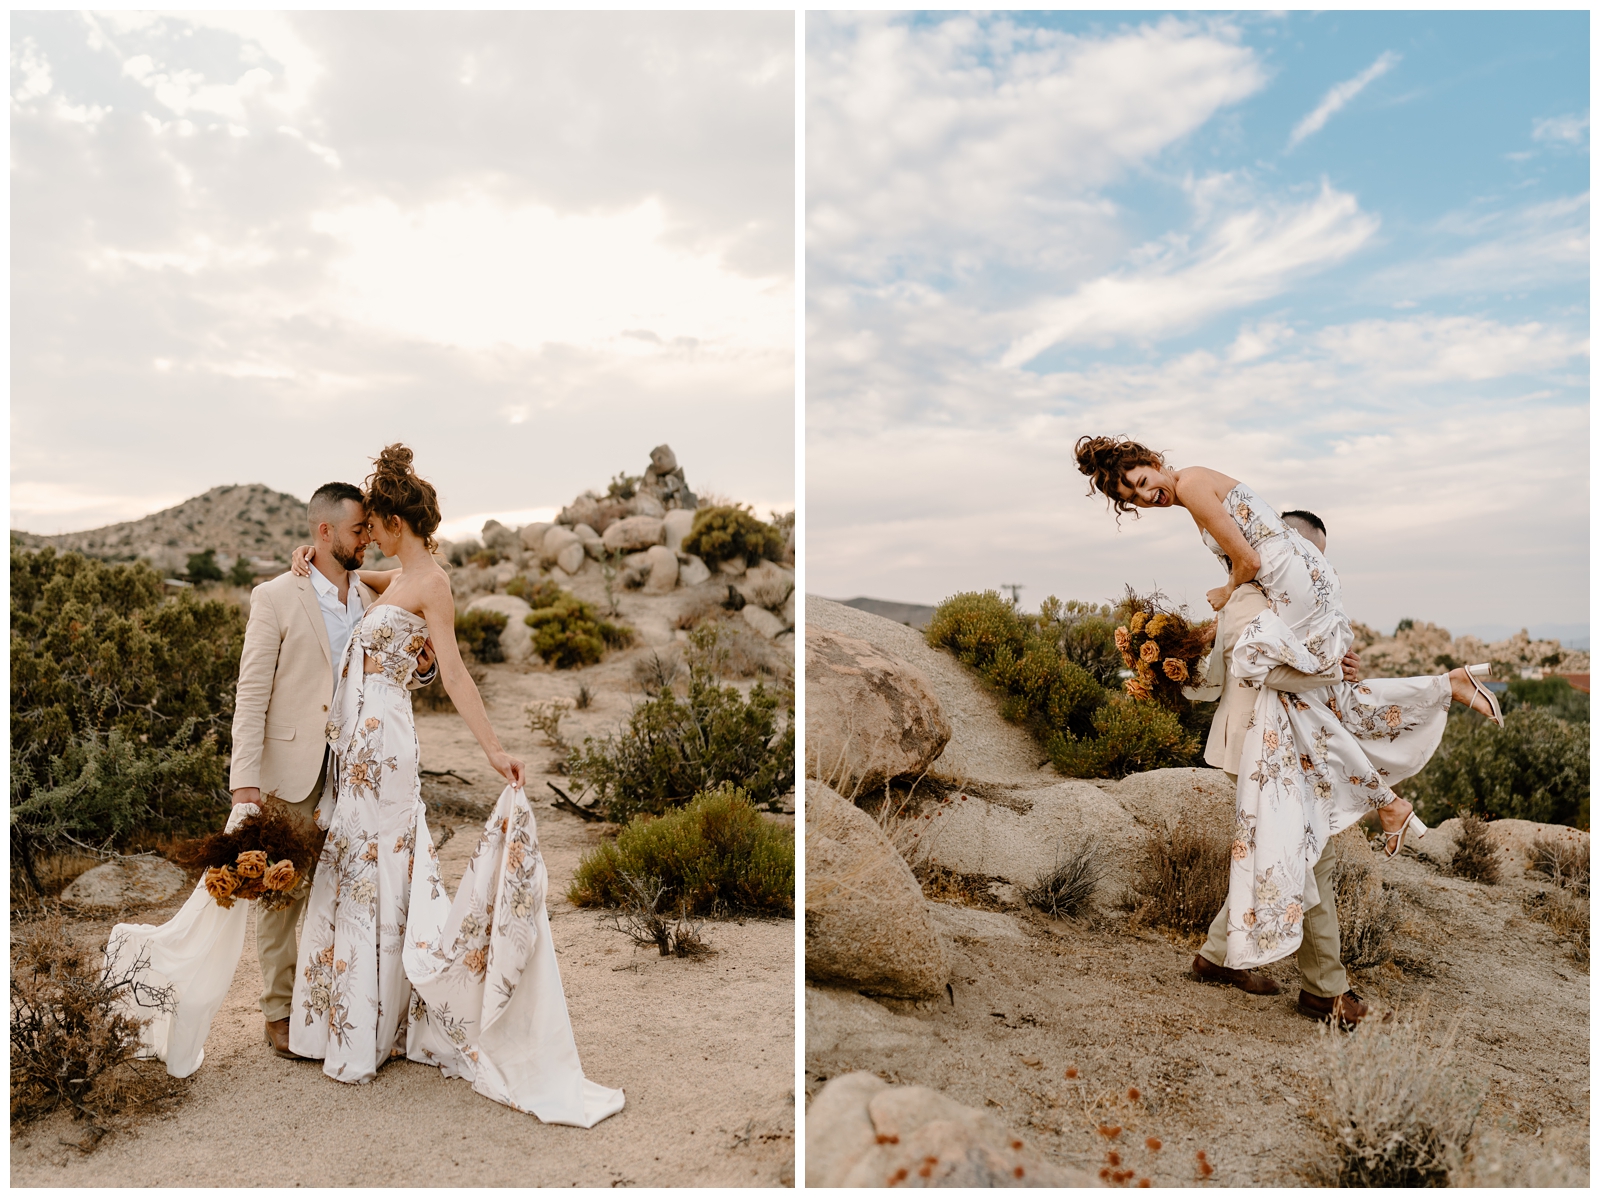 How can an elopement really save you money and be amazing?